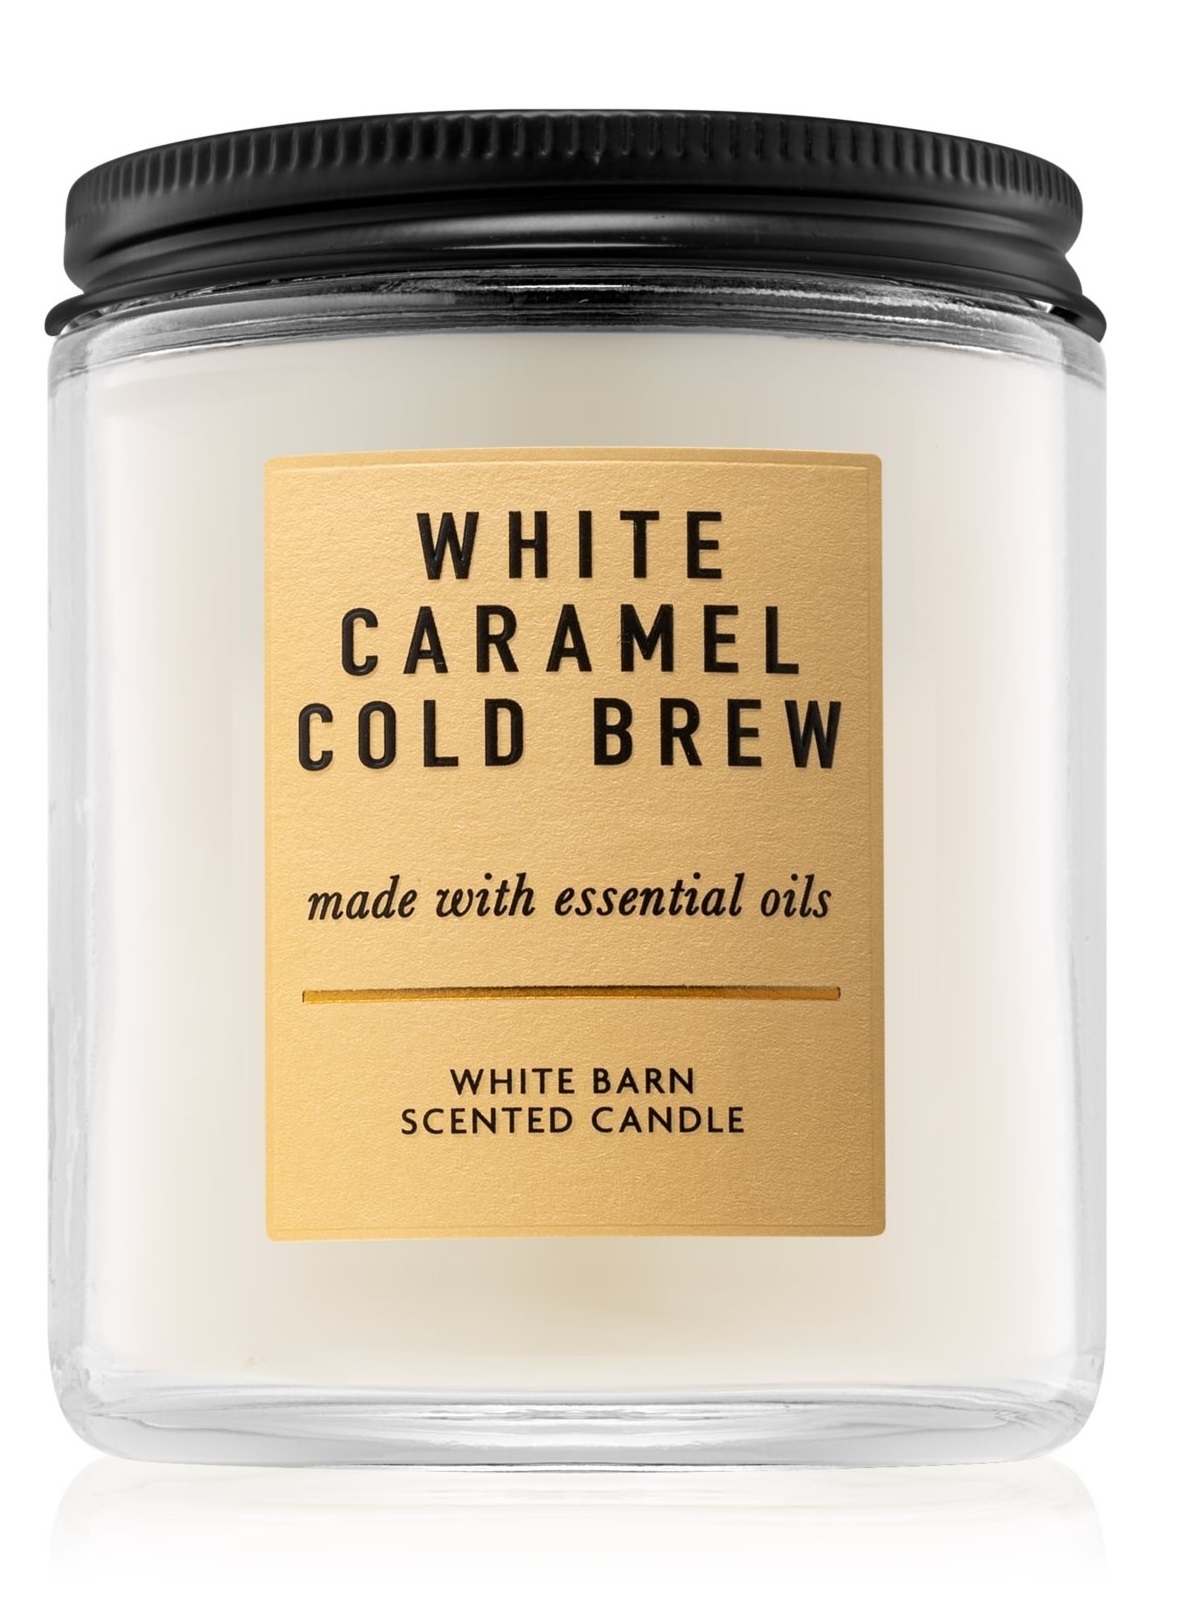 Bath & Body Works Single Wick Candle - White Caramel Cold Brew ...